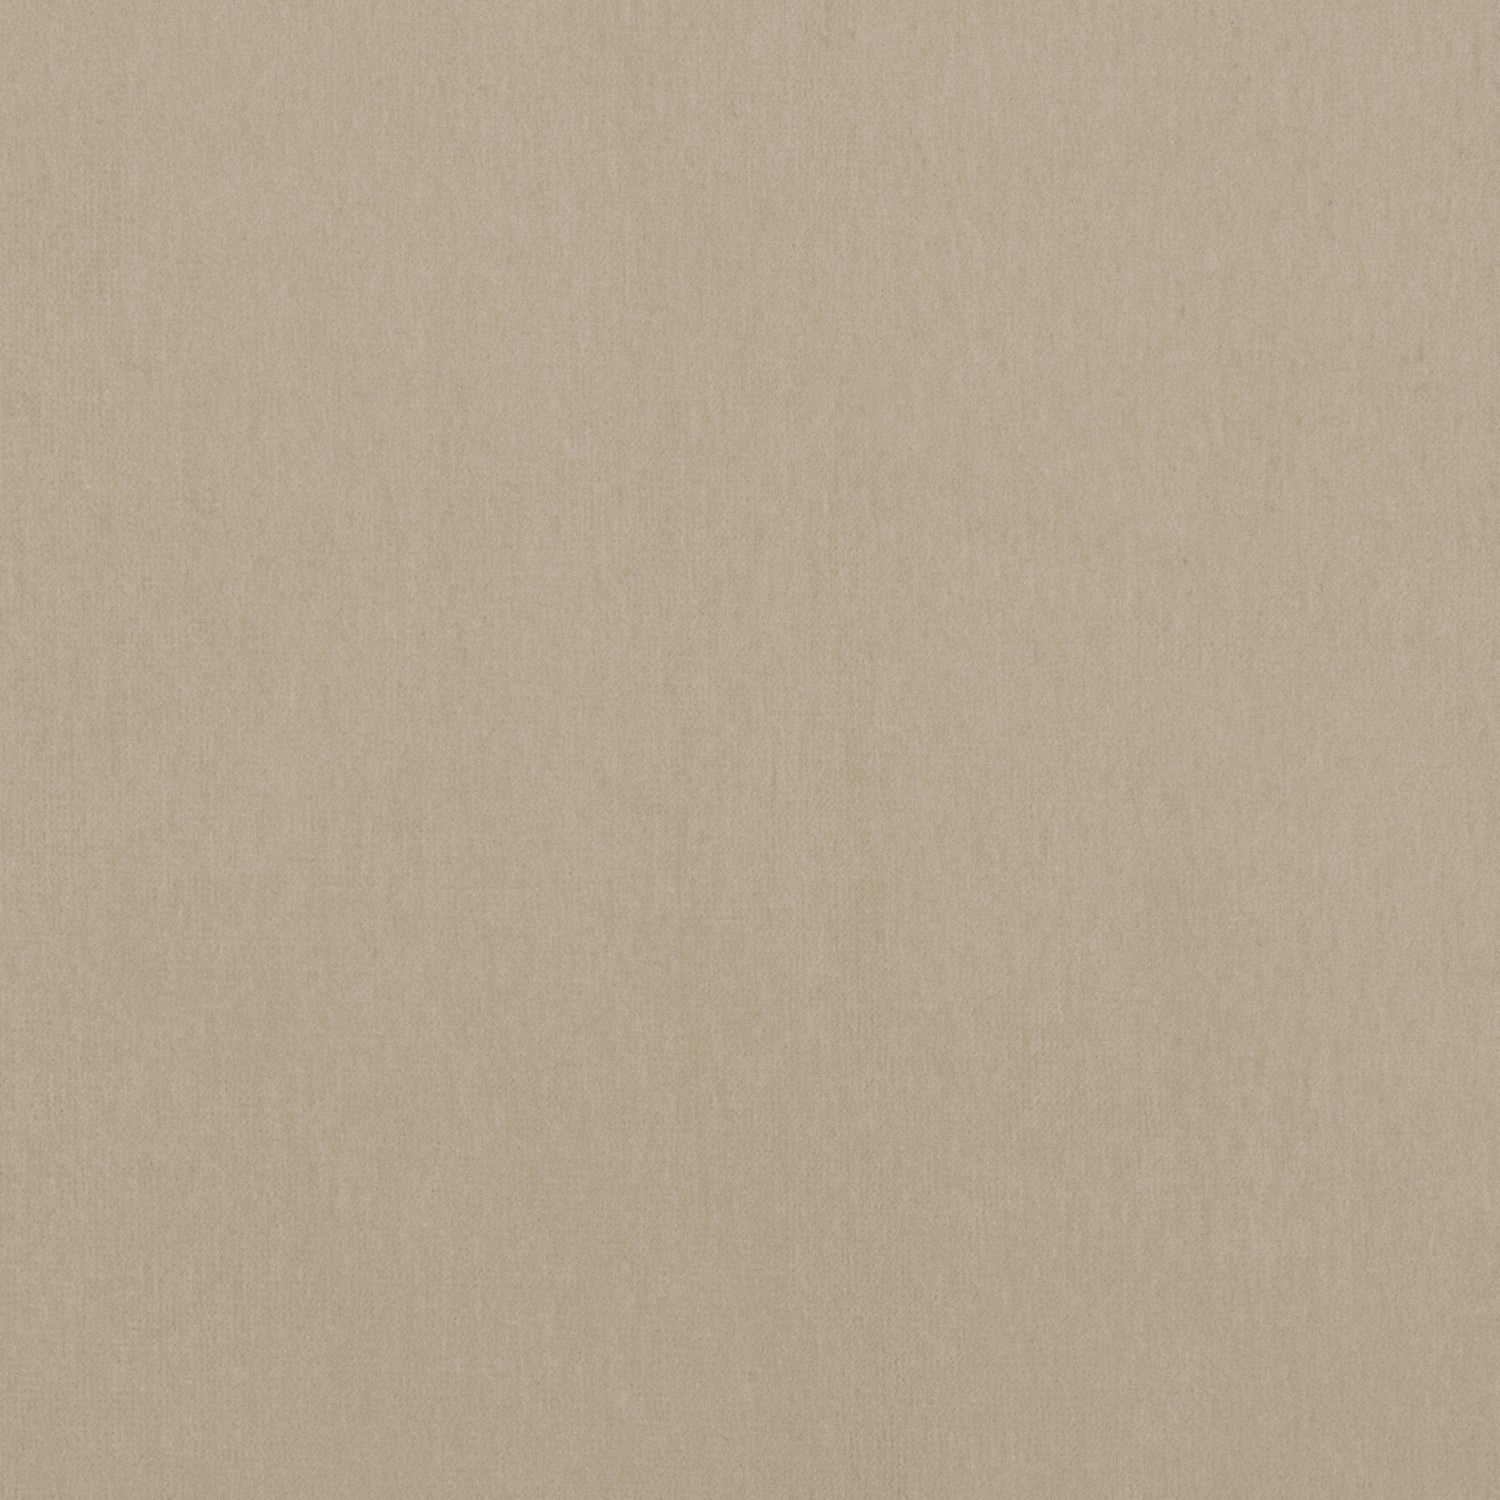 Alto Velvet fabric in stone color - pattern number W8938 - by Thibaut in the Lyra Velvets collection